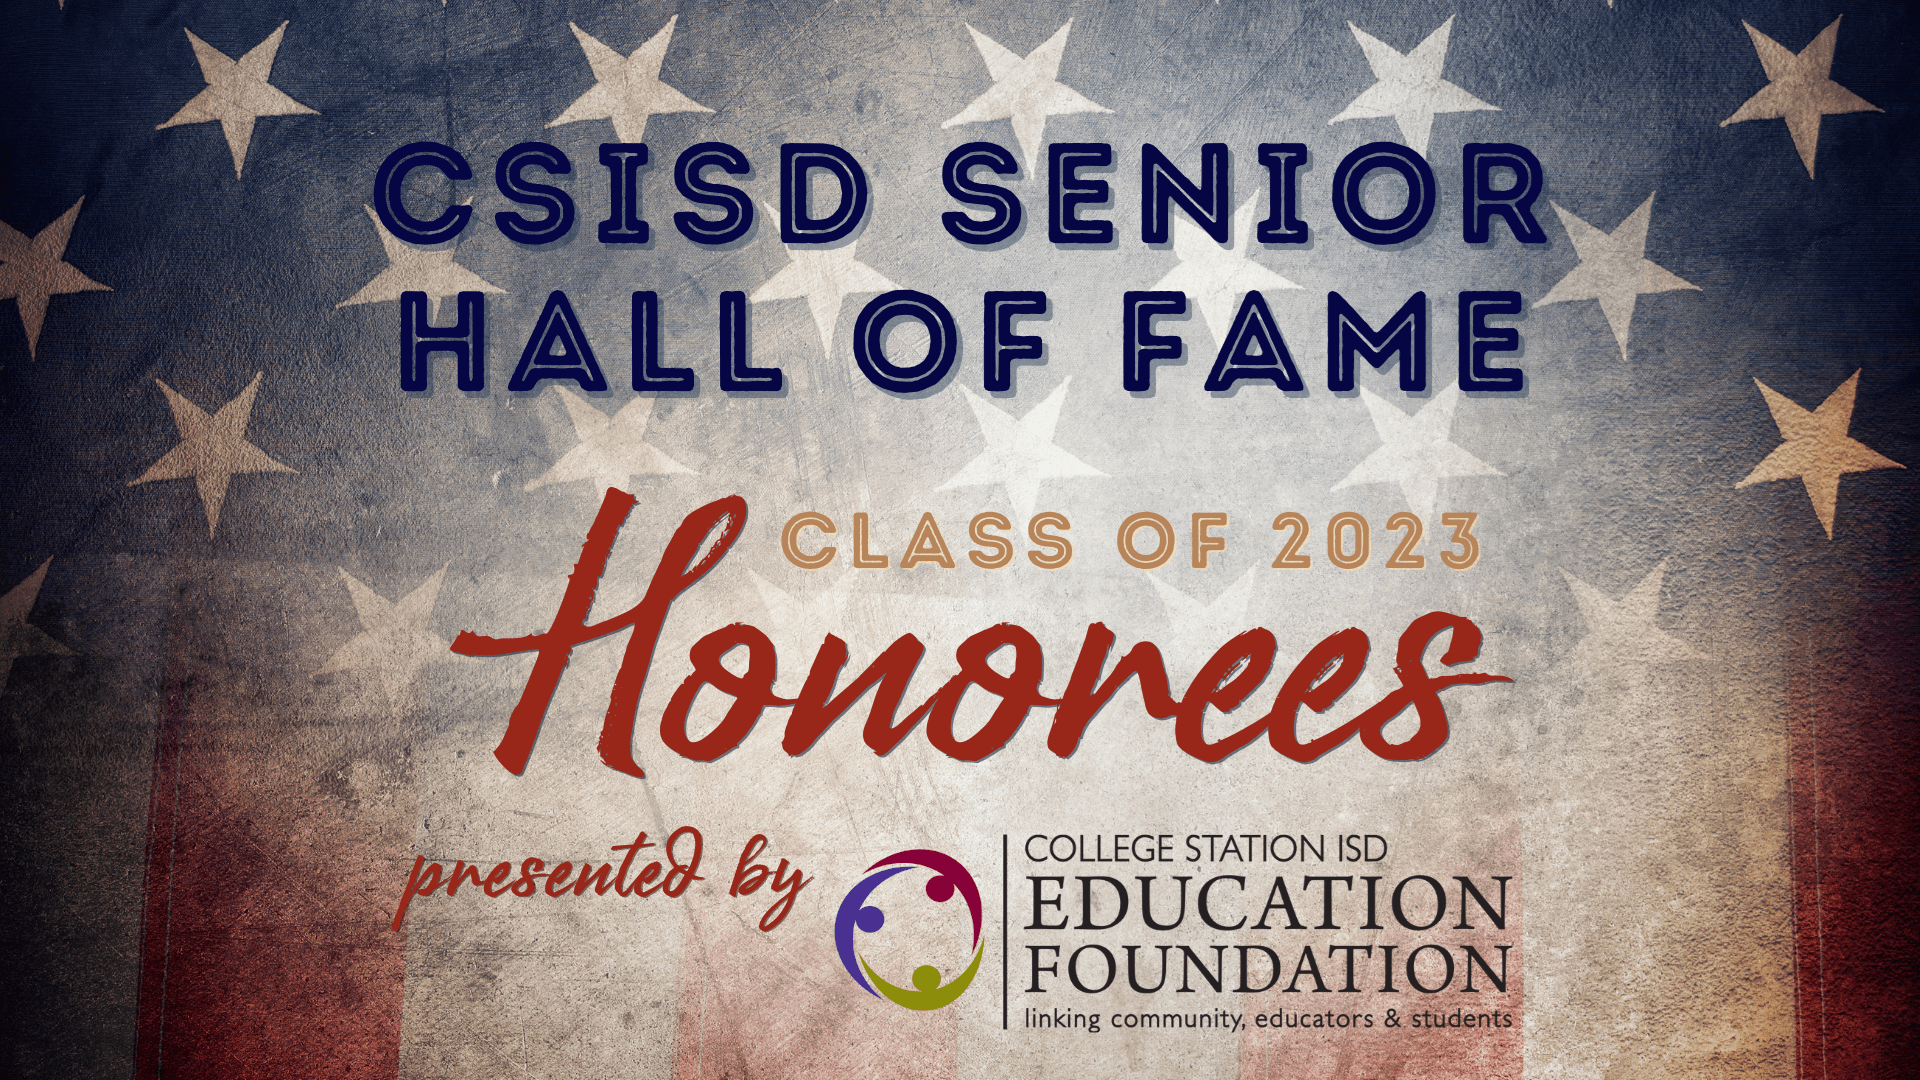 Presenting the Class of 2023 Senior Hall of Fame Honorees